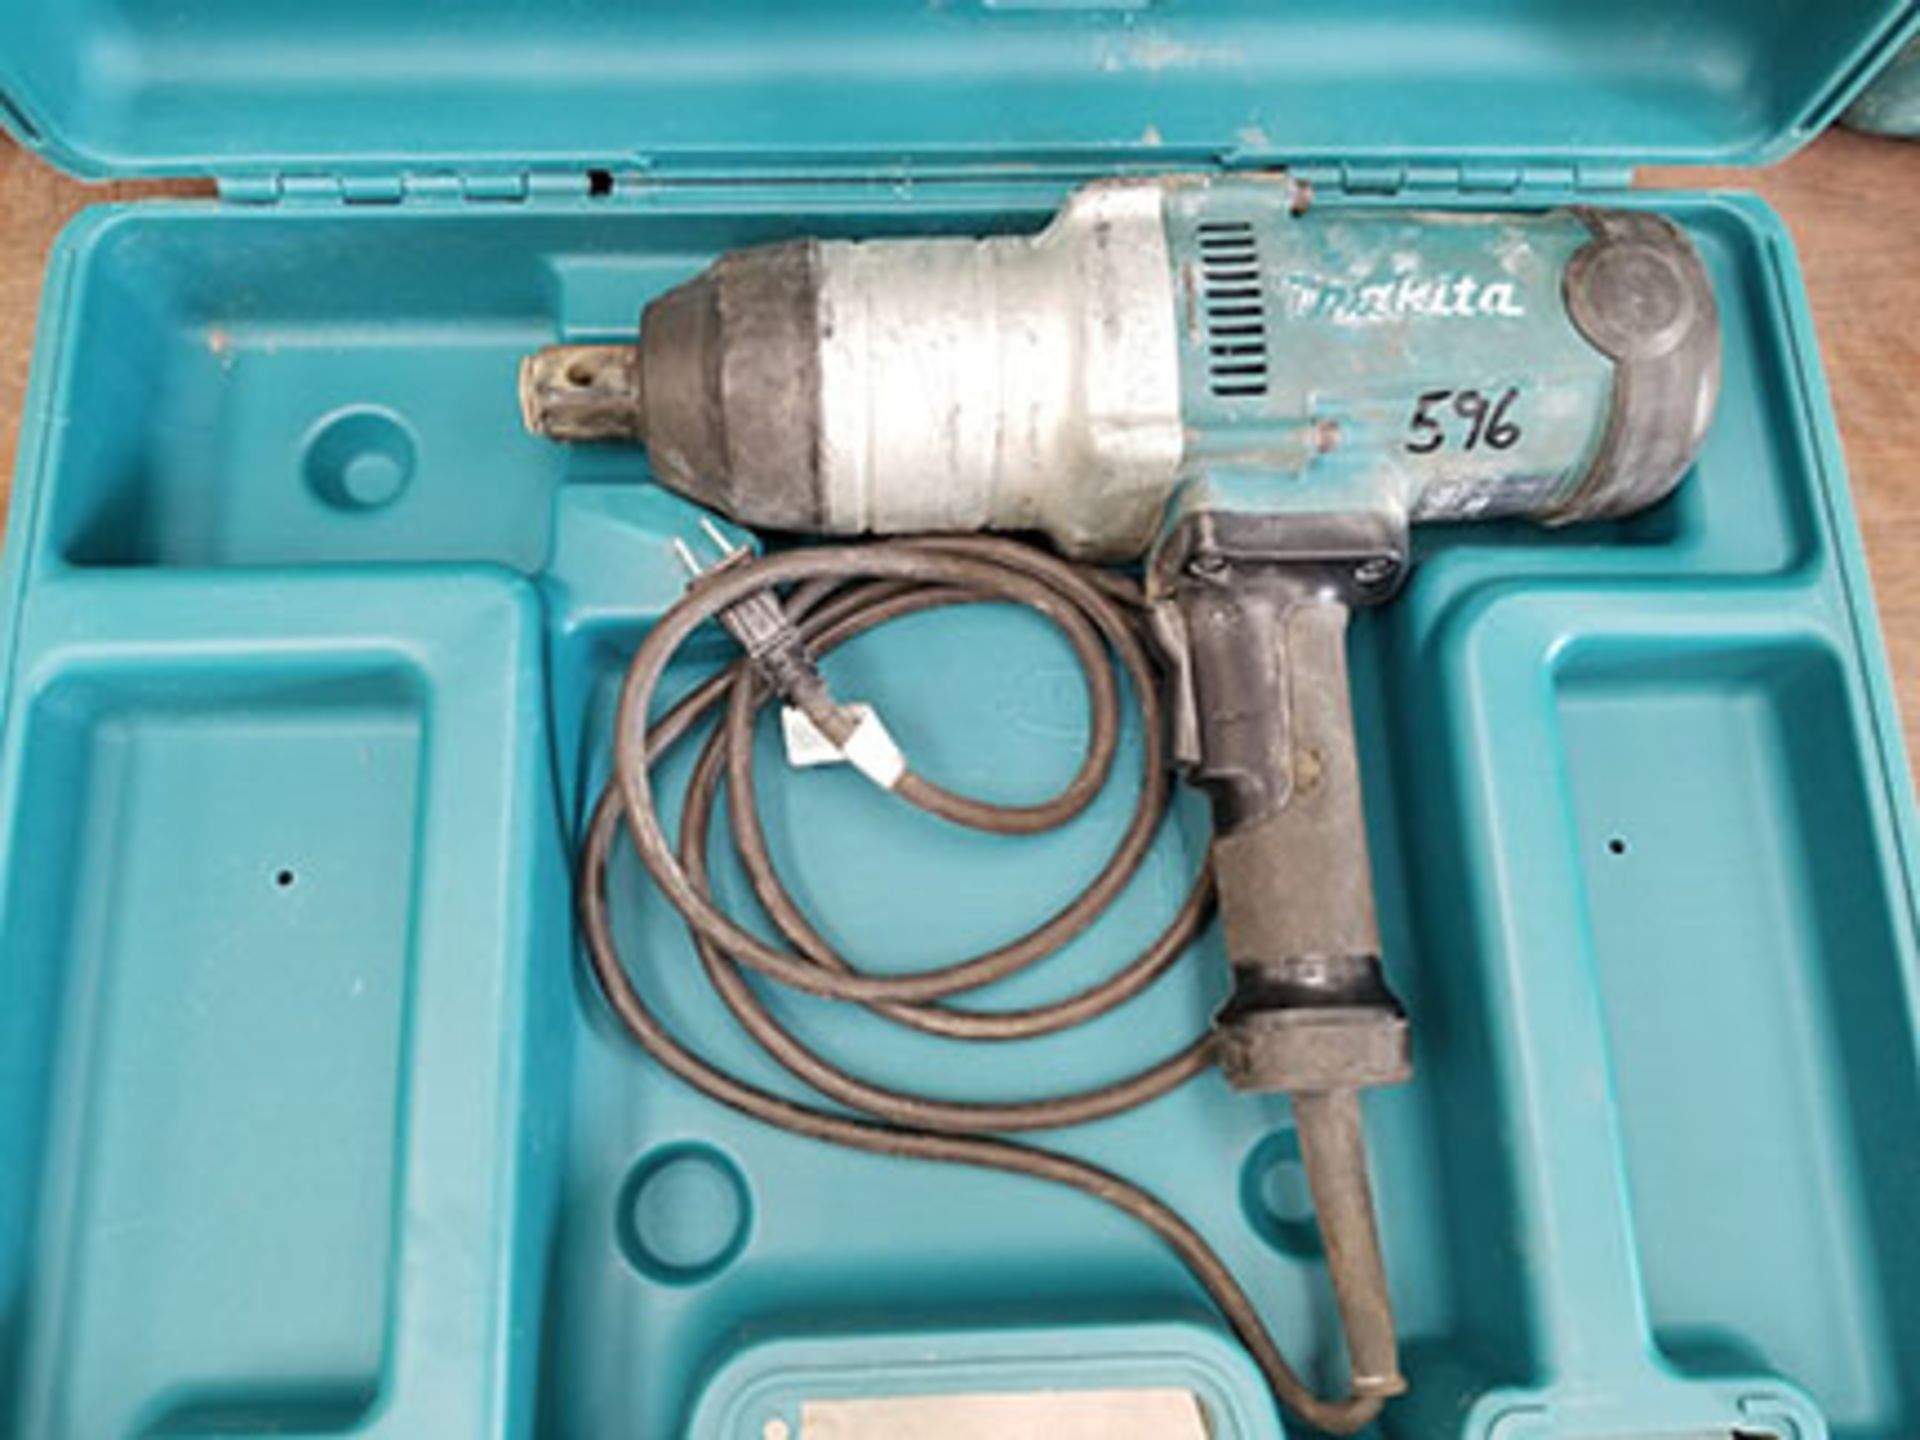 MAKITA TW1000 120V ELECTRIC IMPACT WRENCH, 1” DRIVE - Image 2 of 4